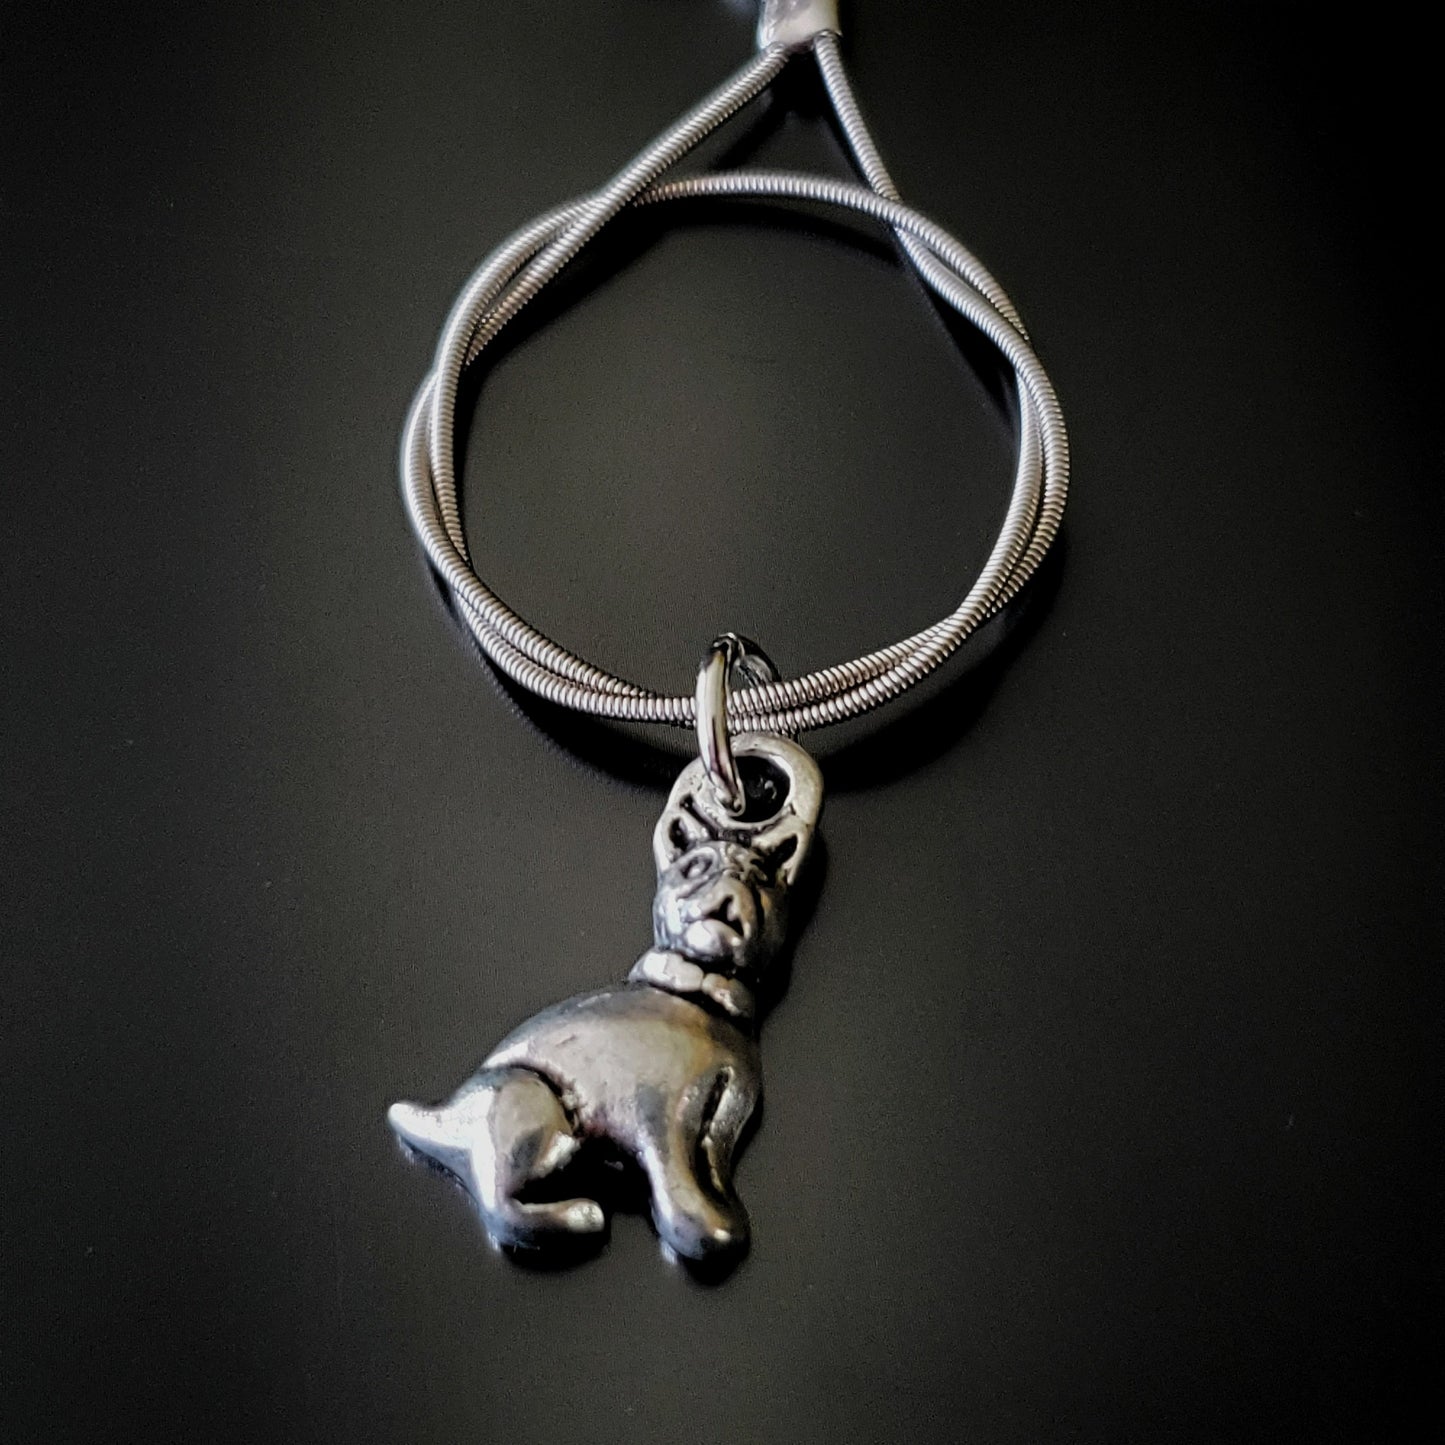 close up of a silver coloured keychain made from an upcycled guitar string on which hangs a silver dog pendant - black background with grey shadow